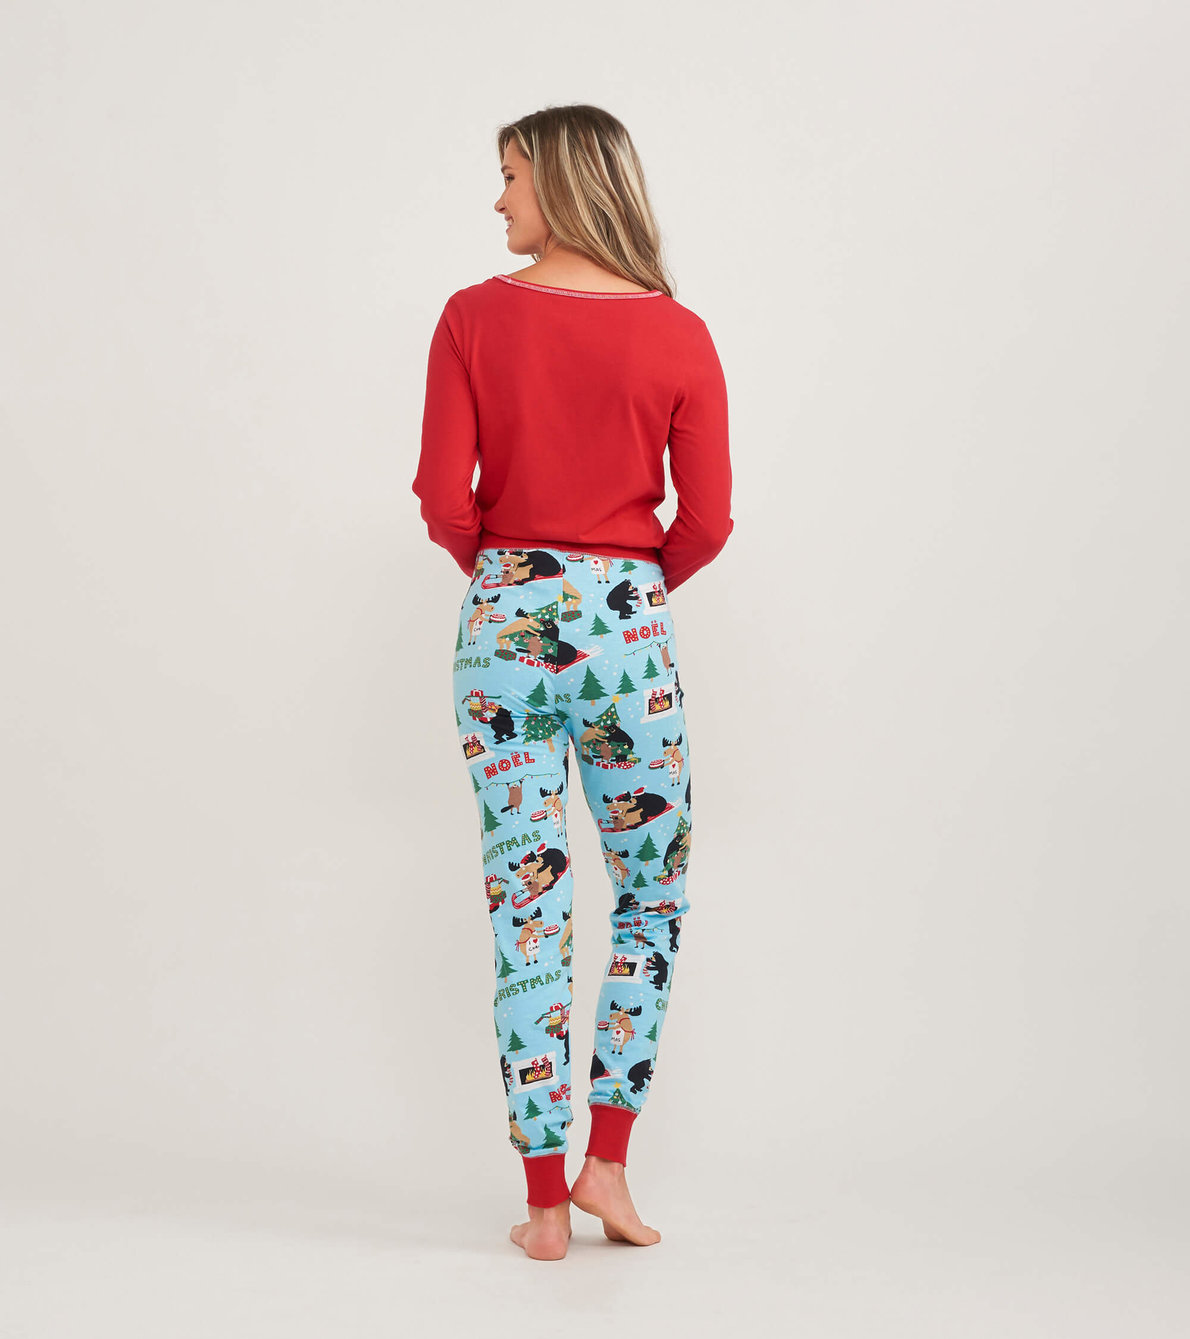 View larger image of Wild About Christmas Women's Long Sleeve Tee and Leggings Pajama Separates